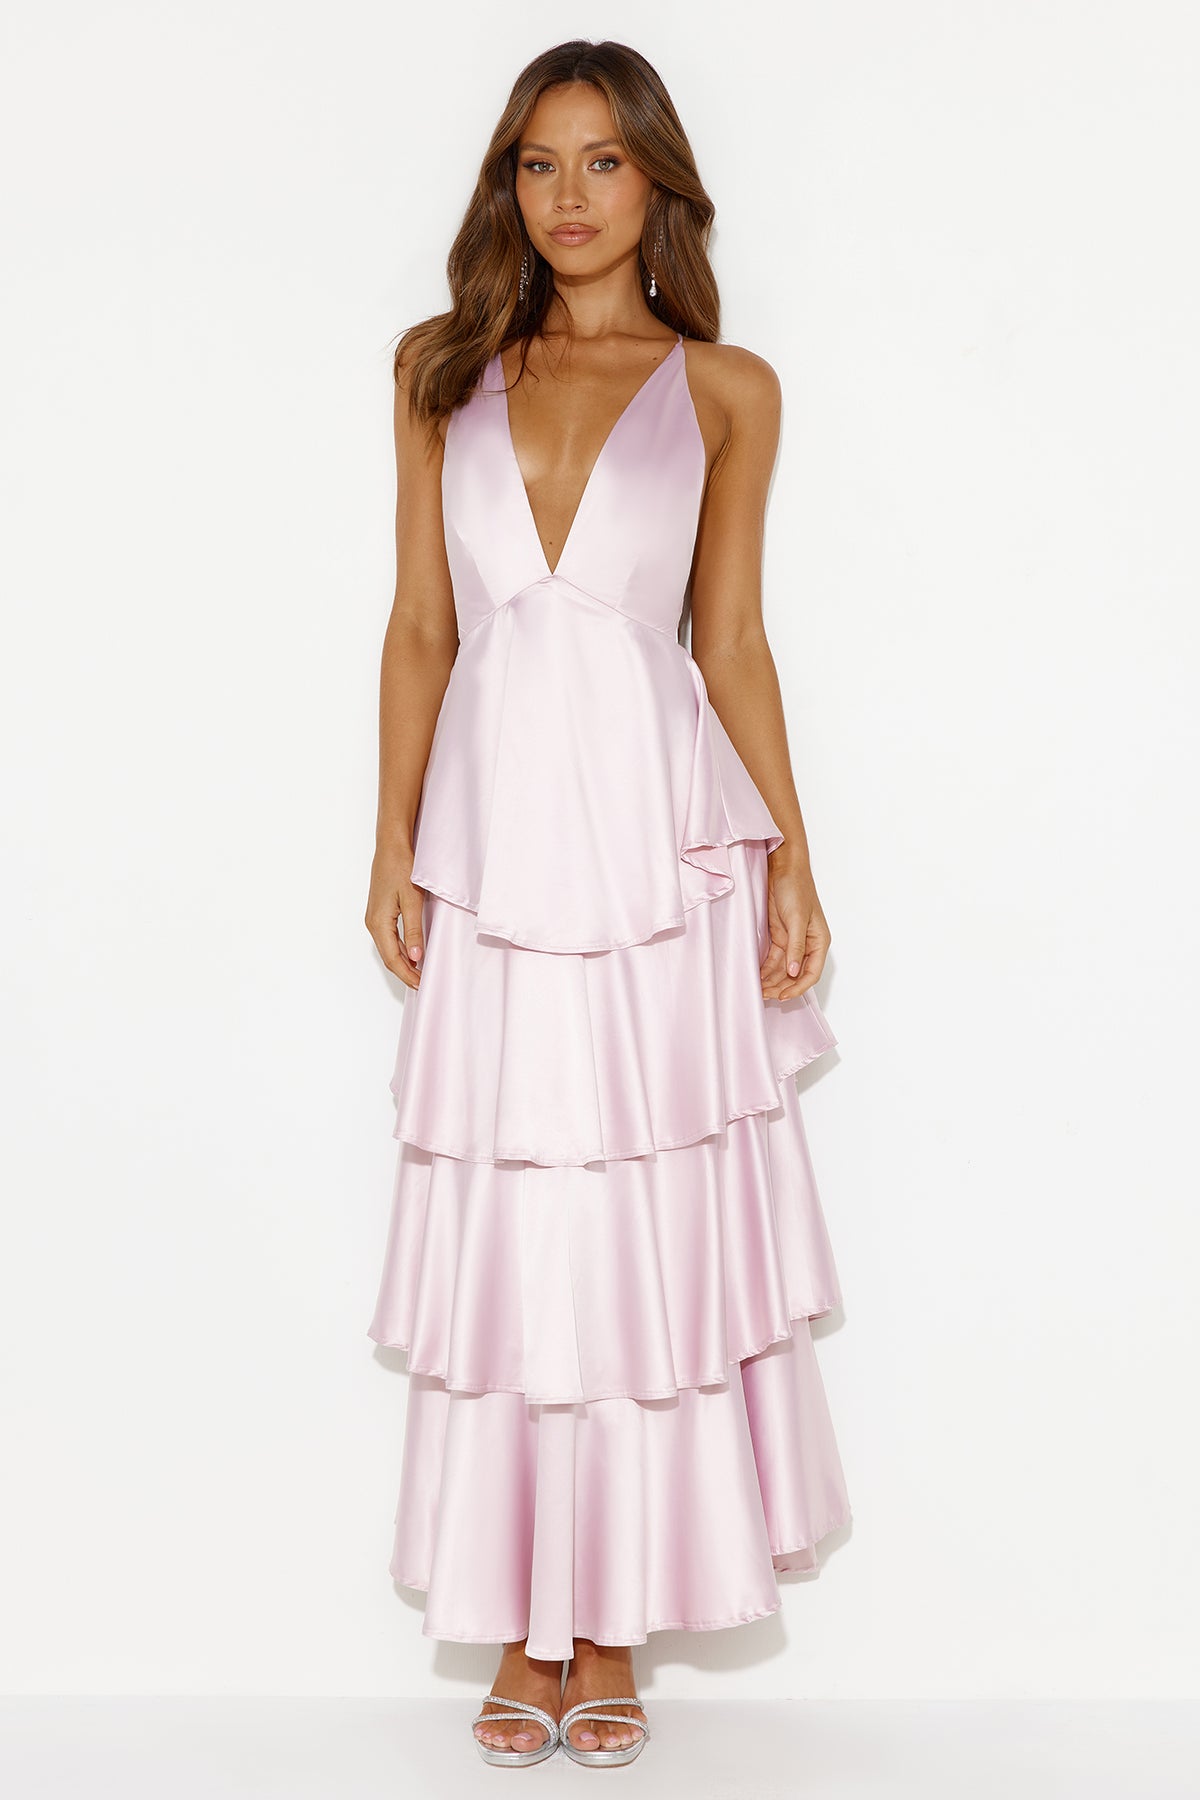 Shop Formal Dress - Party Of The Year Satin Maxi Dress Light Pink featured image